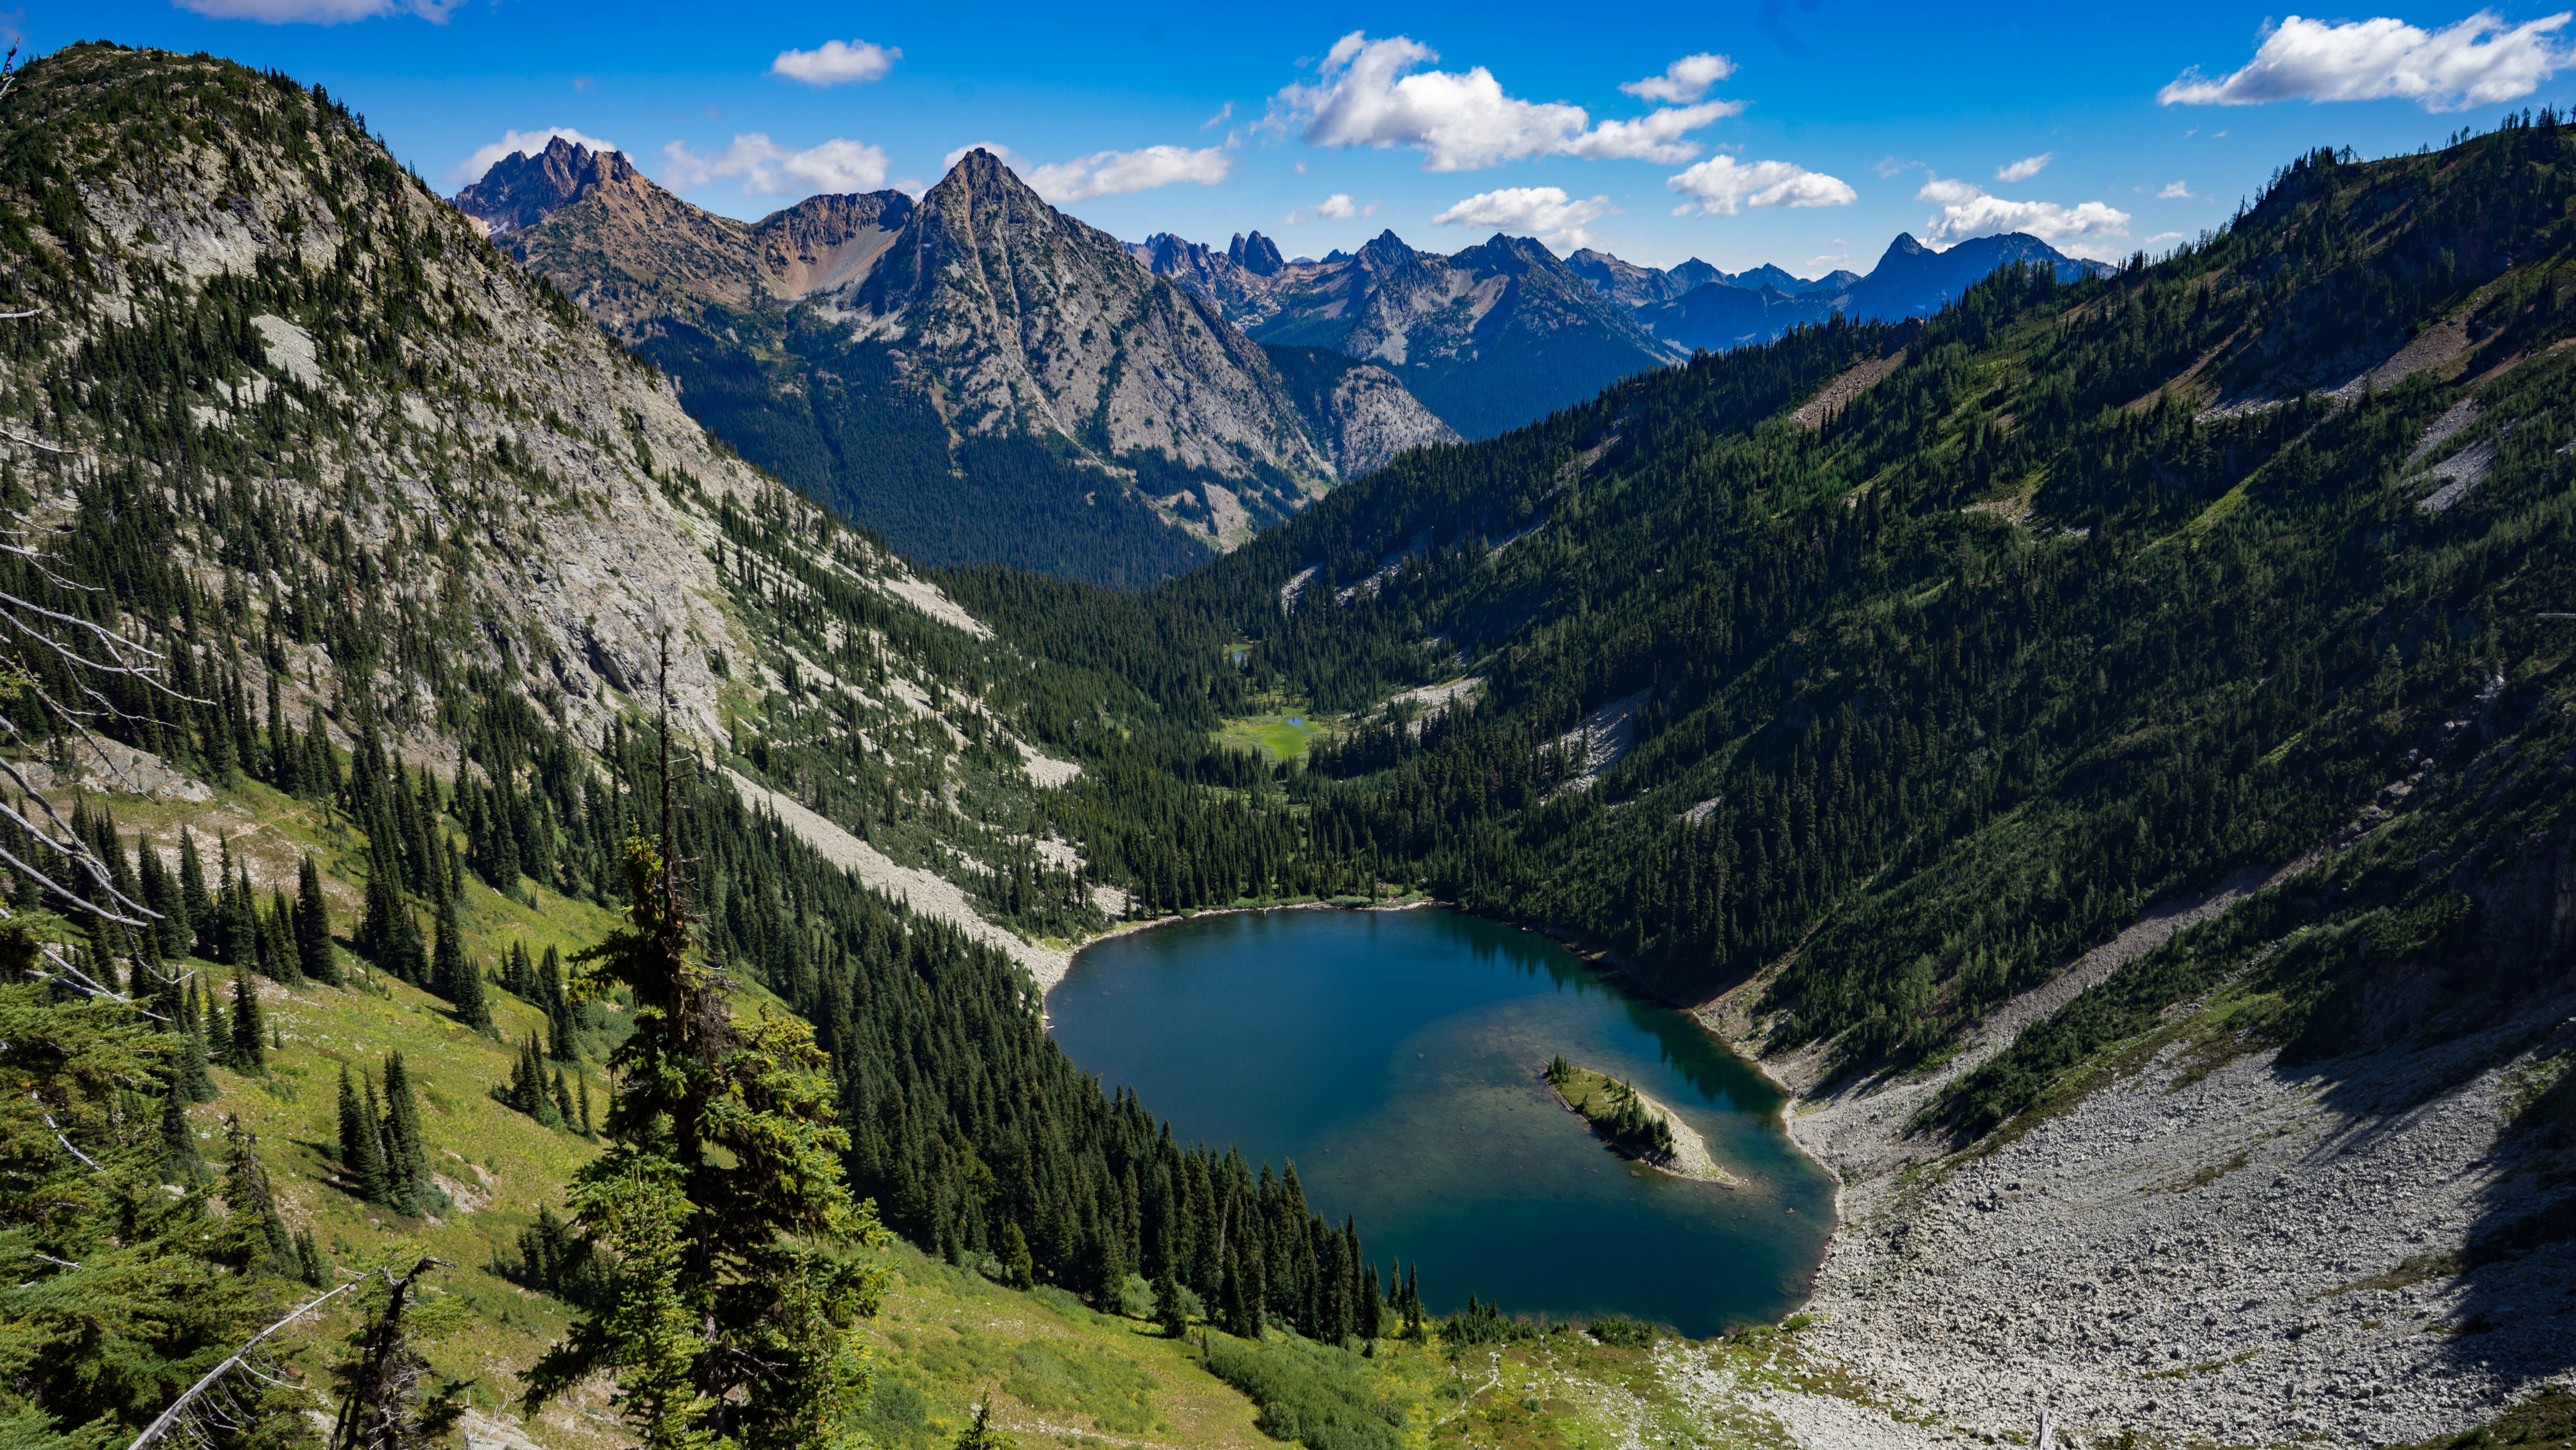 Scenic view of lakes and forests in Washington state 